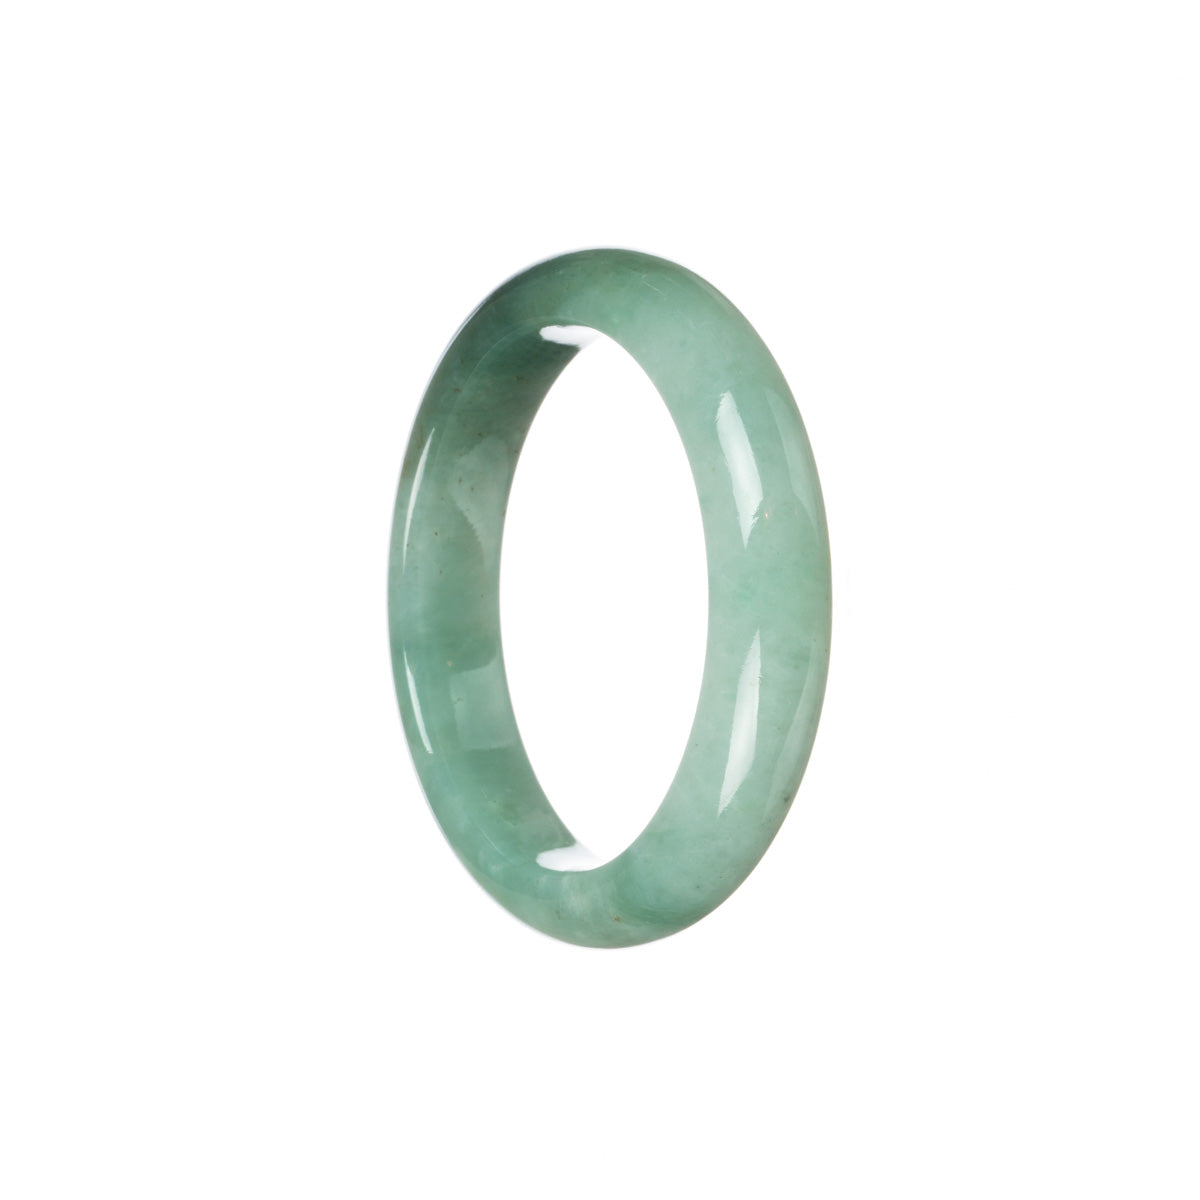 A close-up image of a bluish green Burmese jade bangle bracelet, showcasing its unique half moon shape. This high-quality bracelet is made of genuine Grade A jade, perfect for adding a touch of elegance to any outfit.